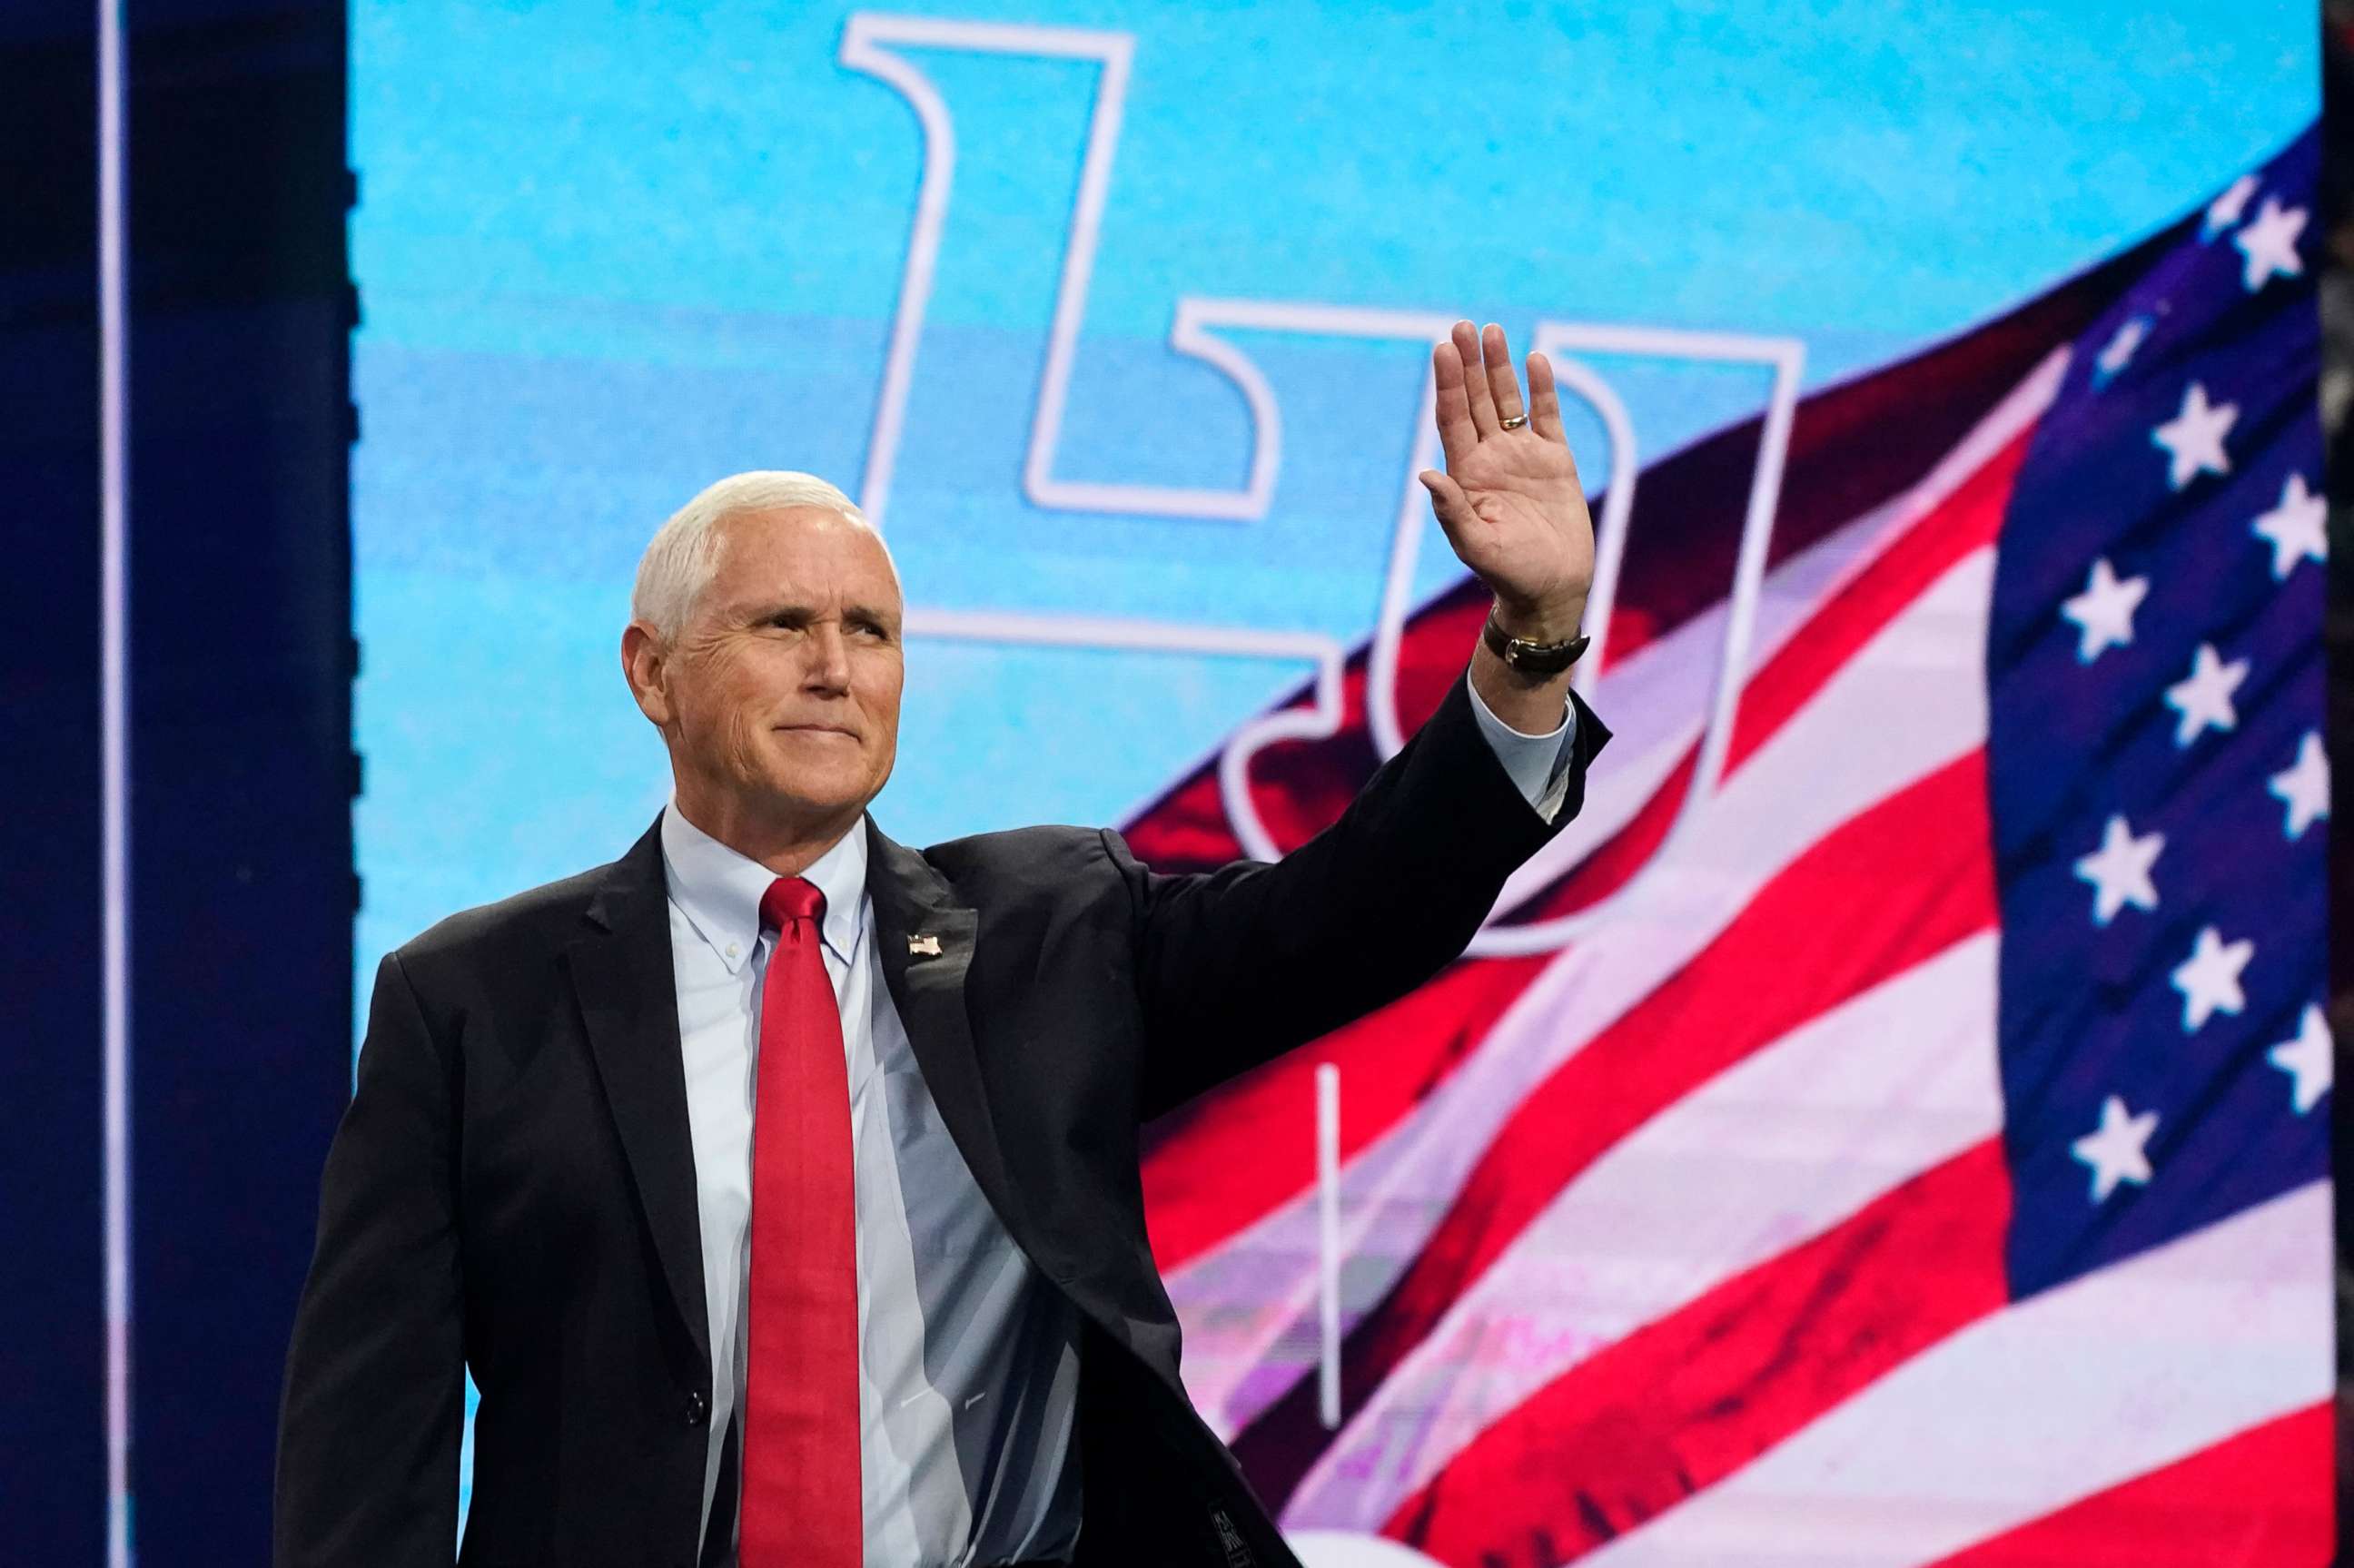 PHOTO: Former Vice President Mike Pence waves to the crowd as he prepares to addresses the convocation at Liberty University, on Sep. 14, 2022, in Lynchburg, Va.